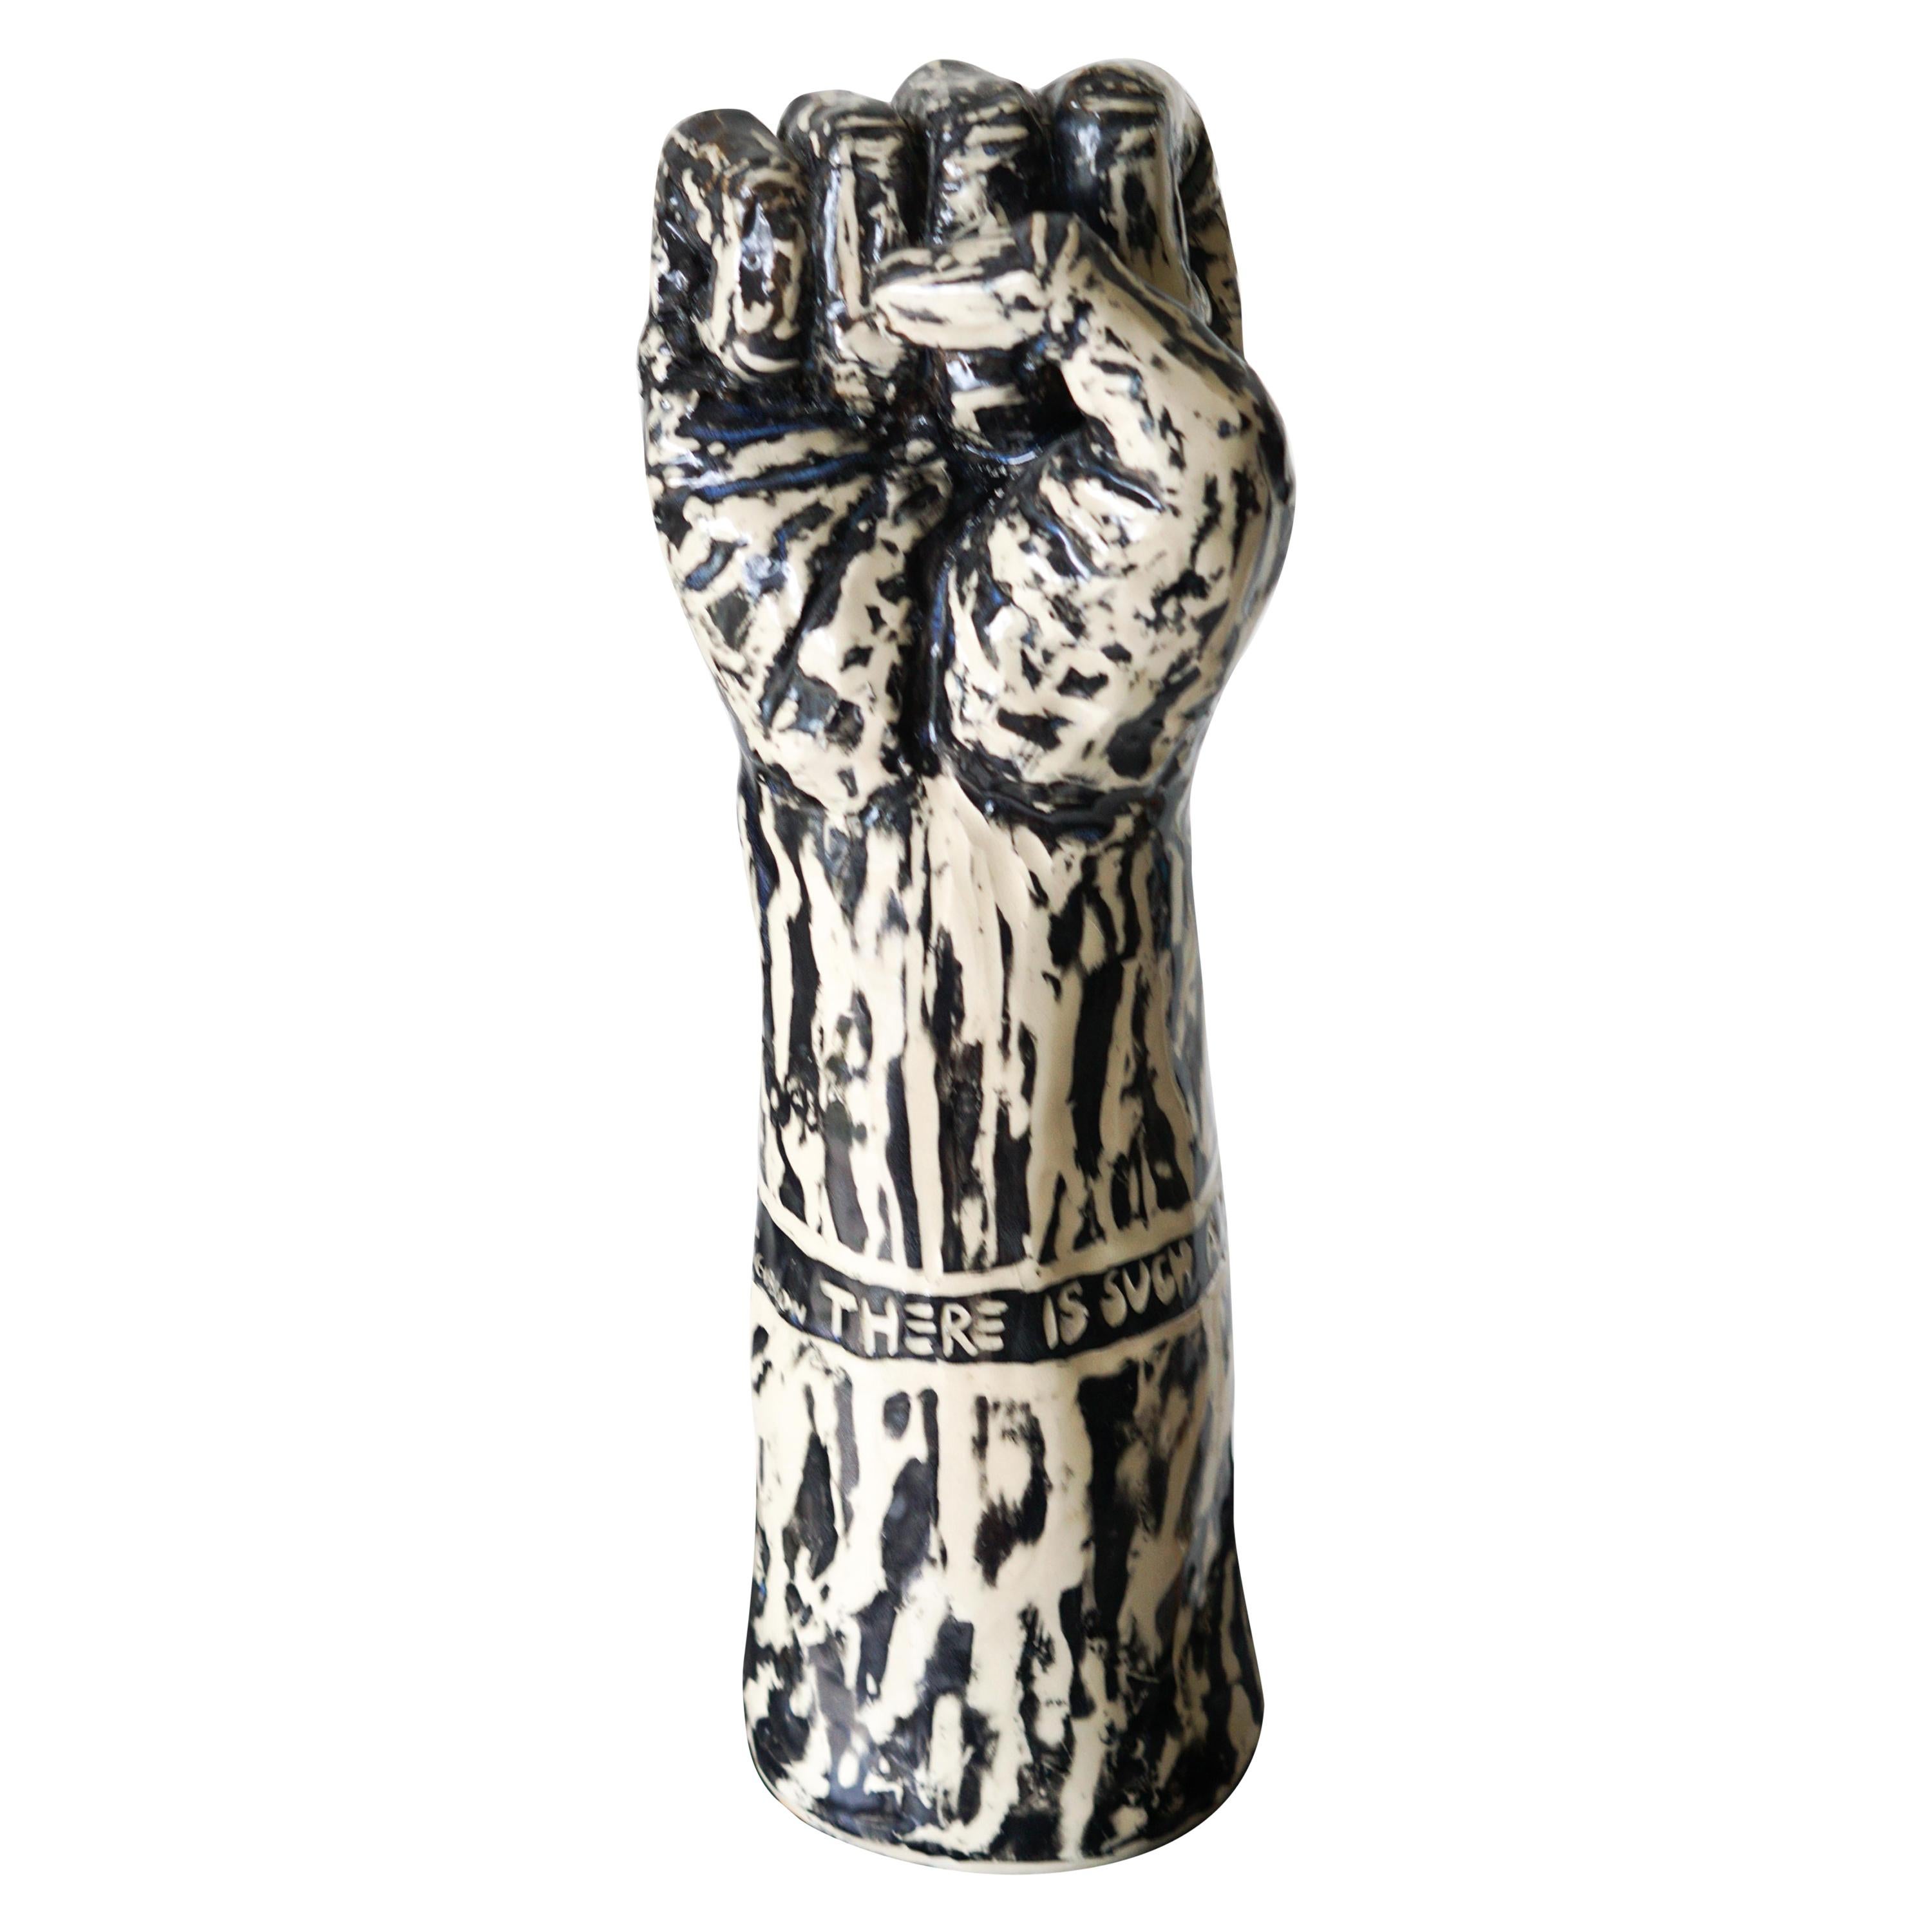 Fist is Not a Fight Ceramic Sculpture with under Glaze Sgraffito